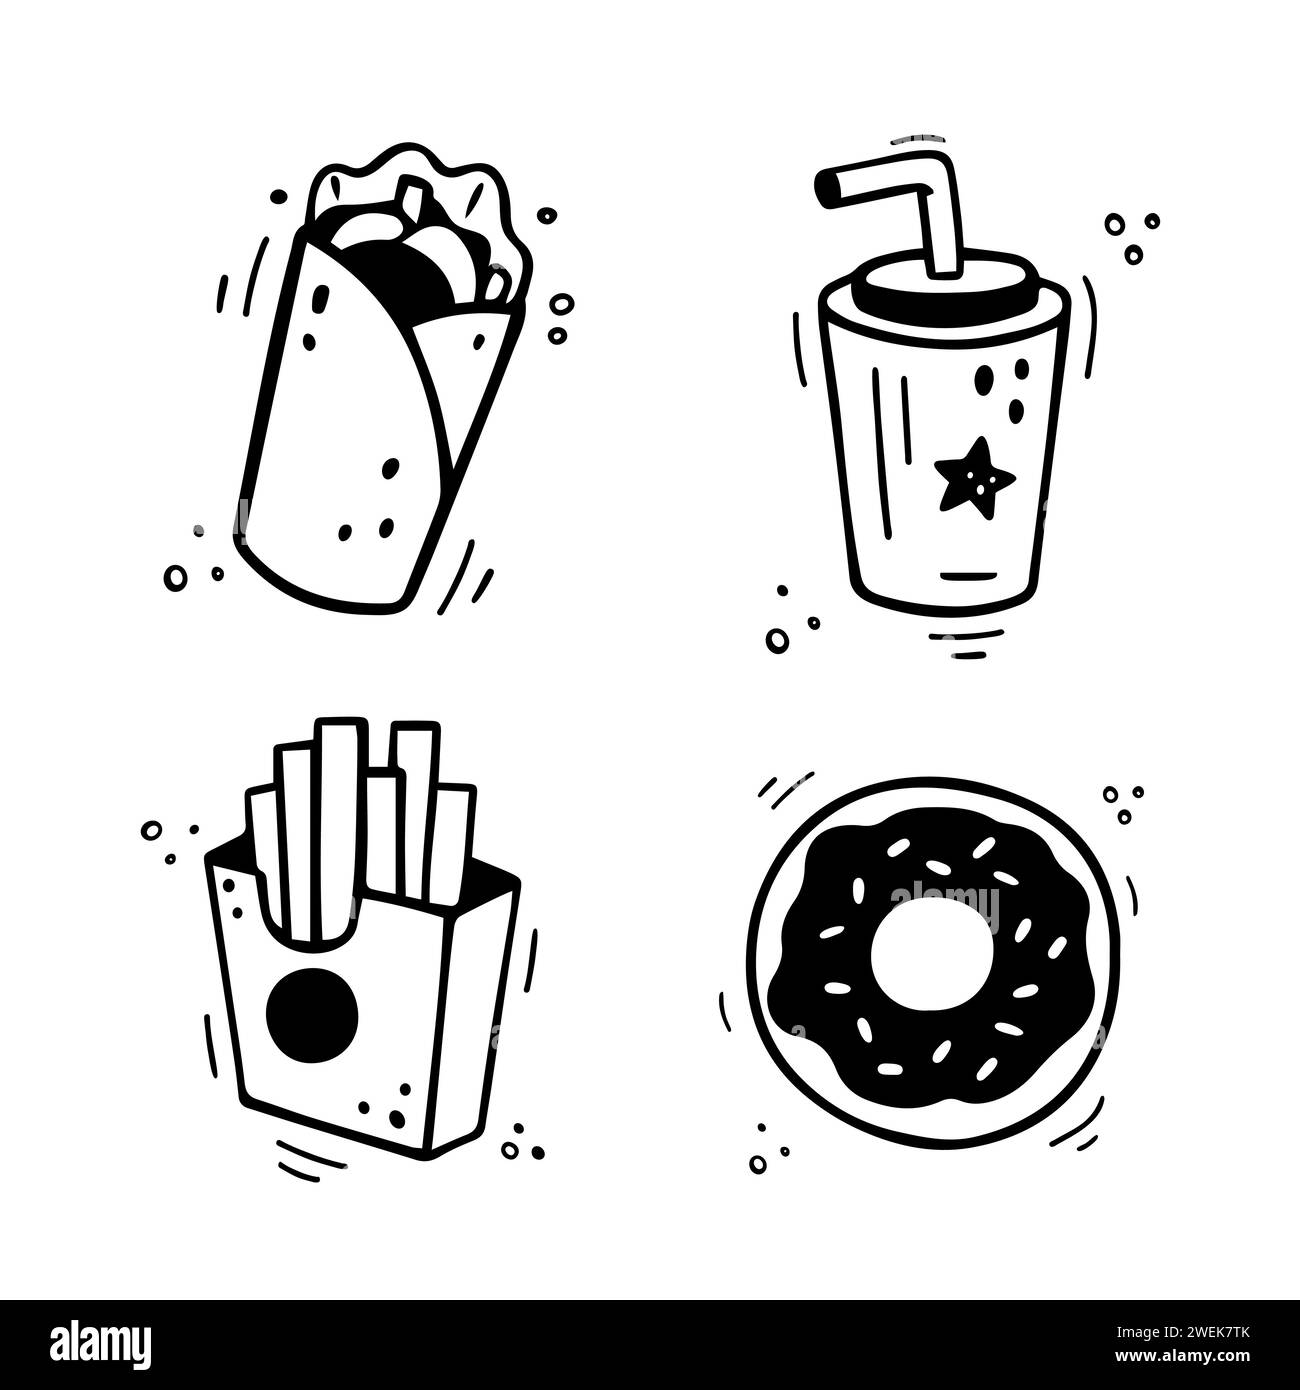 Fast food icons set - shawarma, burrito, French fries, paper cup with drink, donut. Hand drawn fast food combo. Comic doodle style. Colorful snacks drawn with felt tip pen. Vector illustration Stock Vector